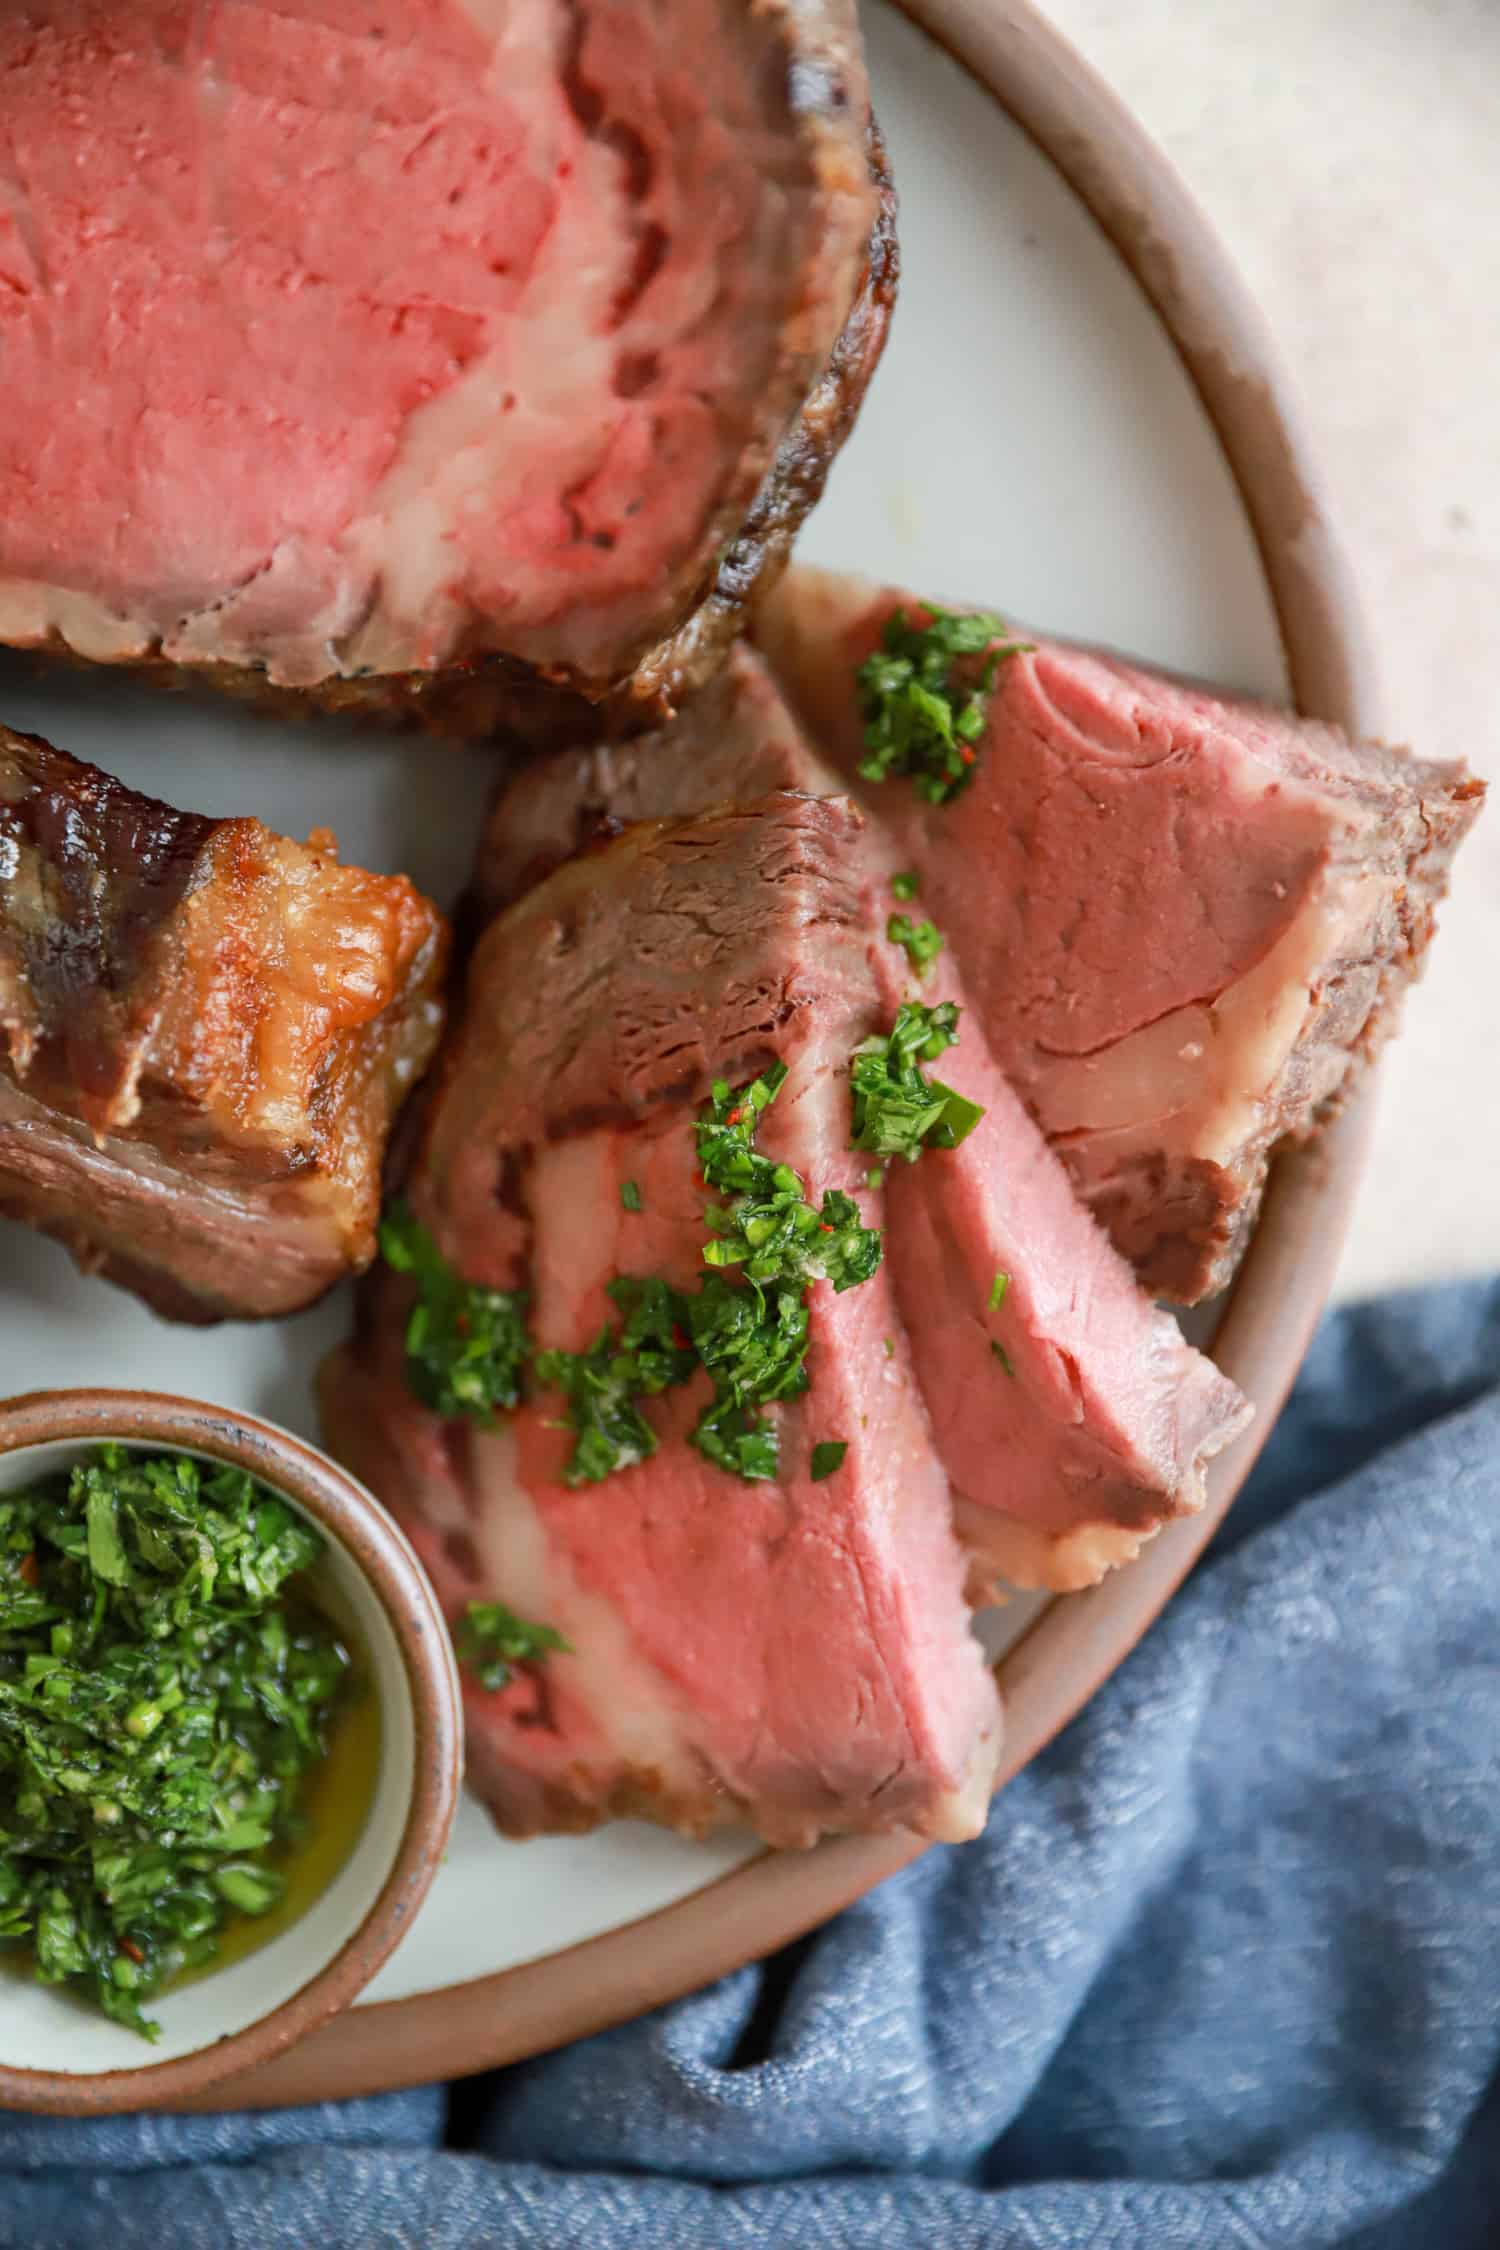 slices of rib roast topped with fresh chimichurri.